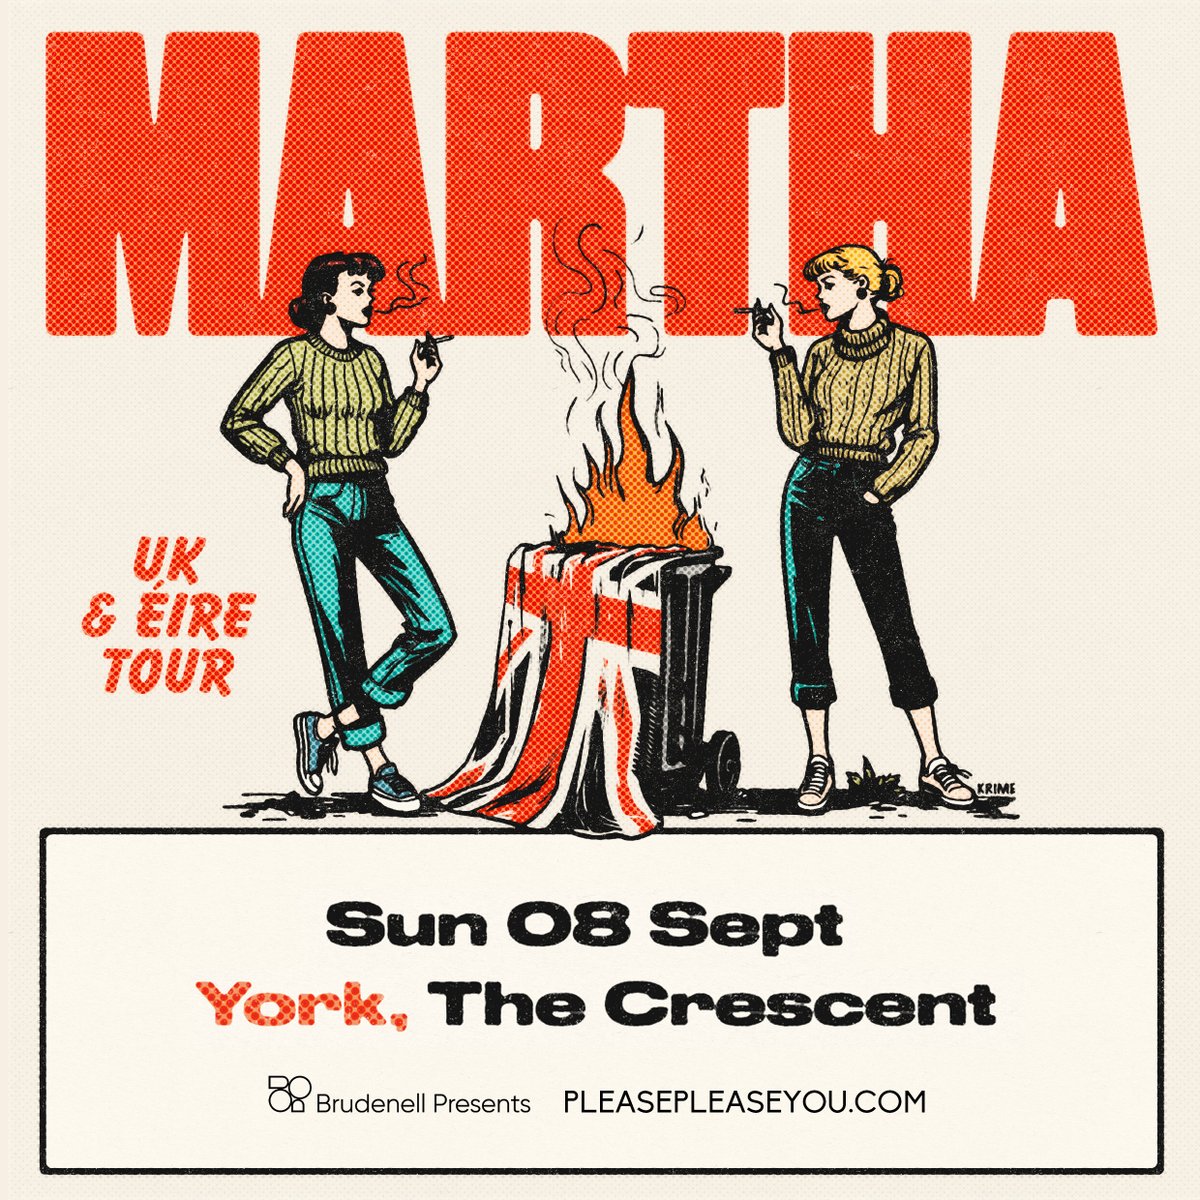 We can't stop announcing gigs today. 😮‍💨 County Durham based power-pop heroes @marthadiy are live in York at @TheCrescentYork on 8th September! 🎸 Tickets on sale Thursday @ 10AM, will be a fun one. 🕺 In collaboration with @PleasePleaseYou 🤝 ➡️ bit.ly/Martha-York